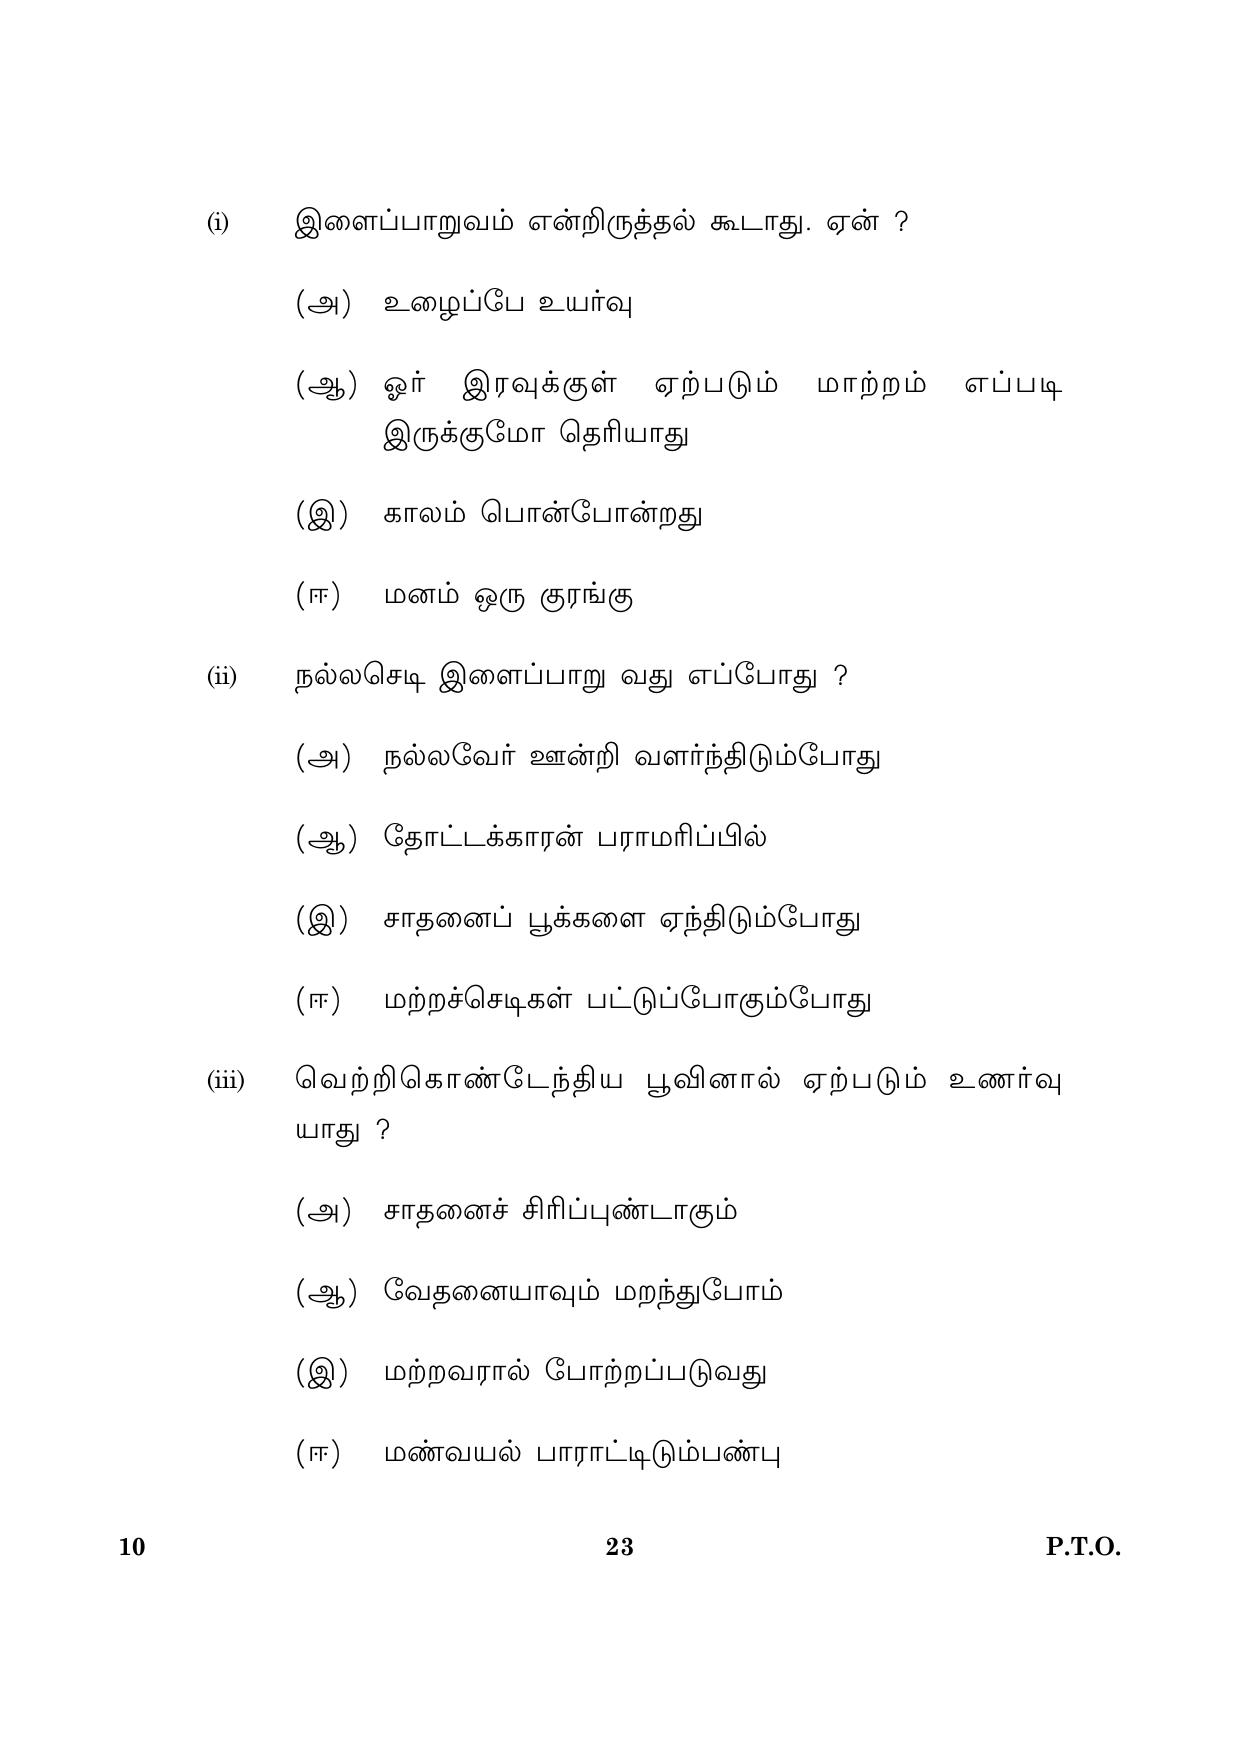 CBSE Class 10 010 Tamil 2016 Question Paper - Page 23